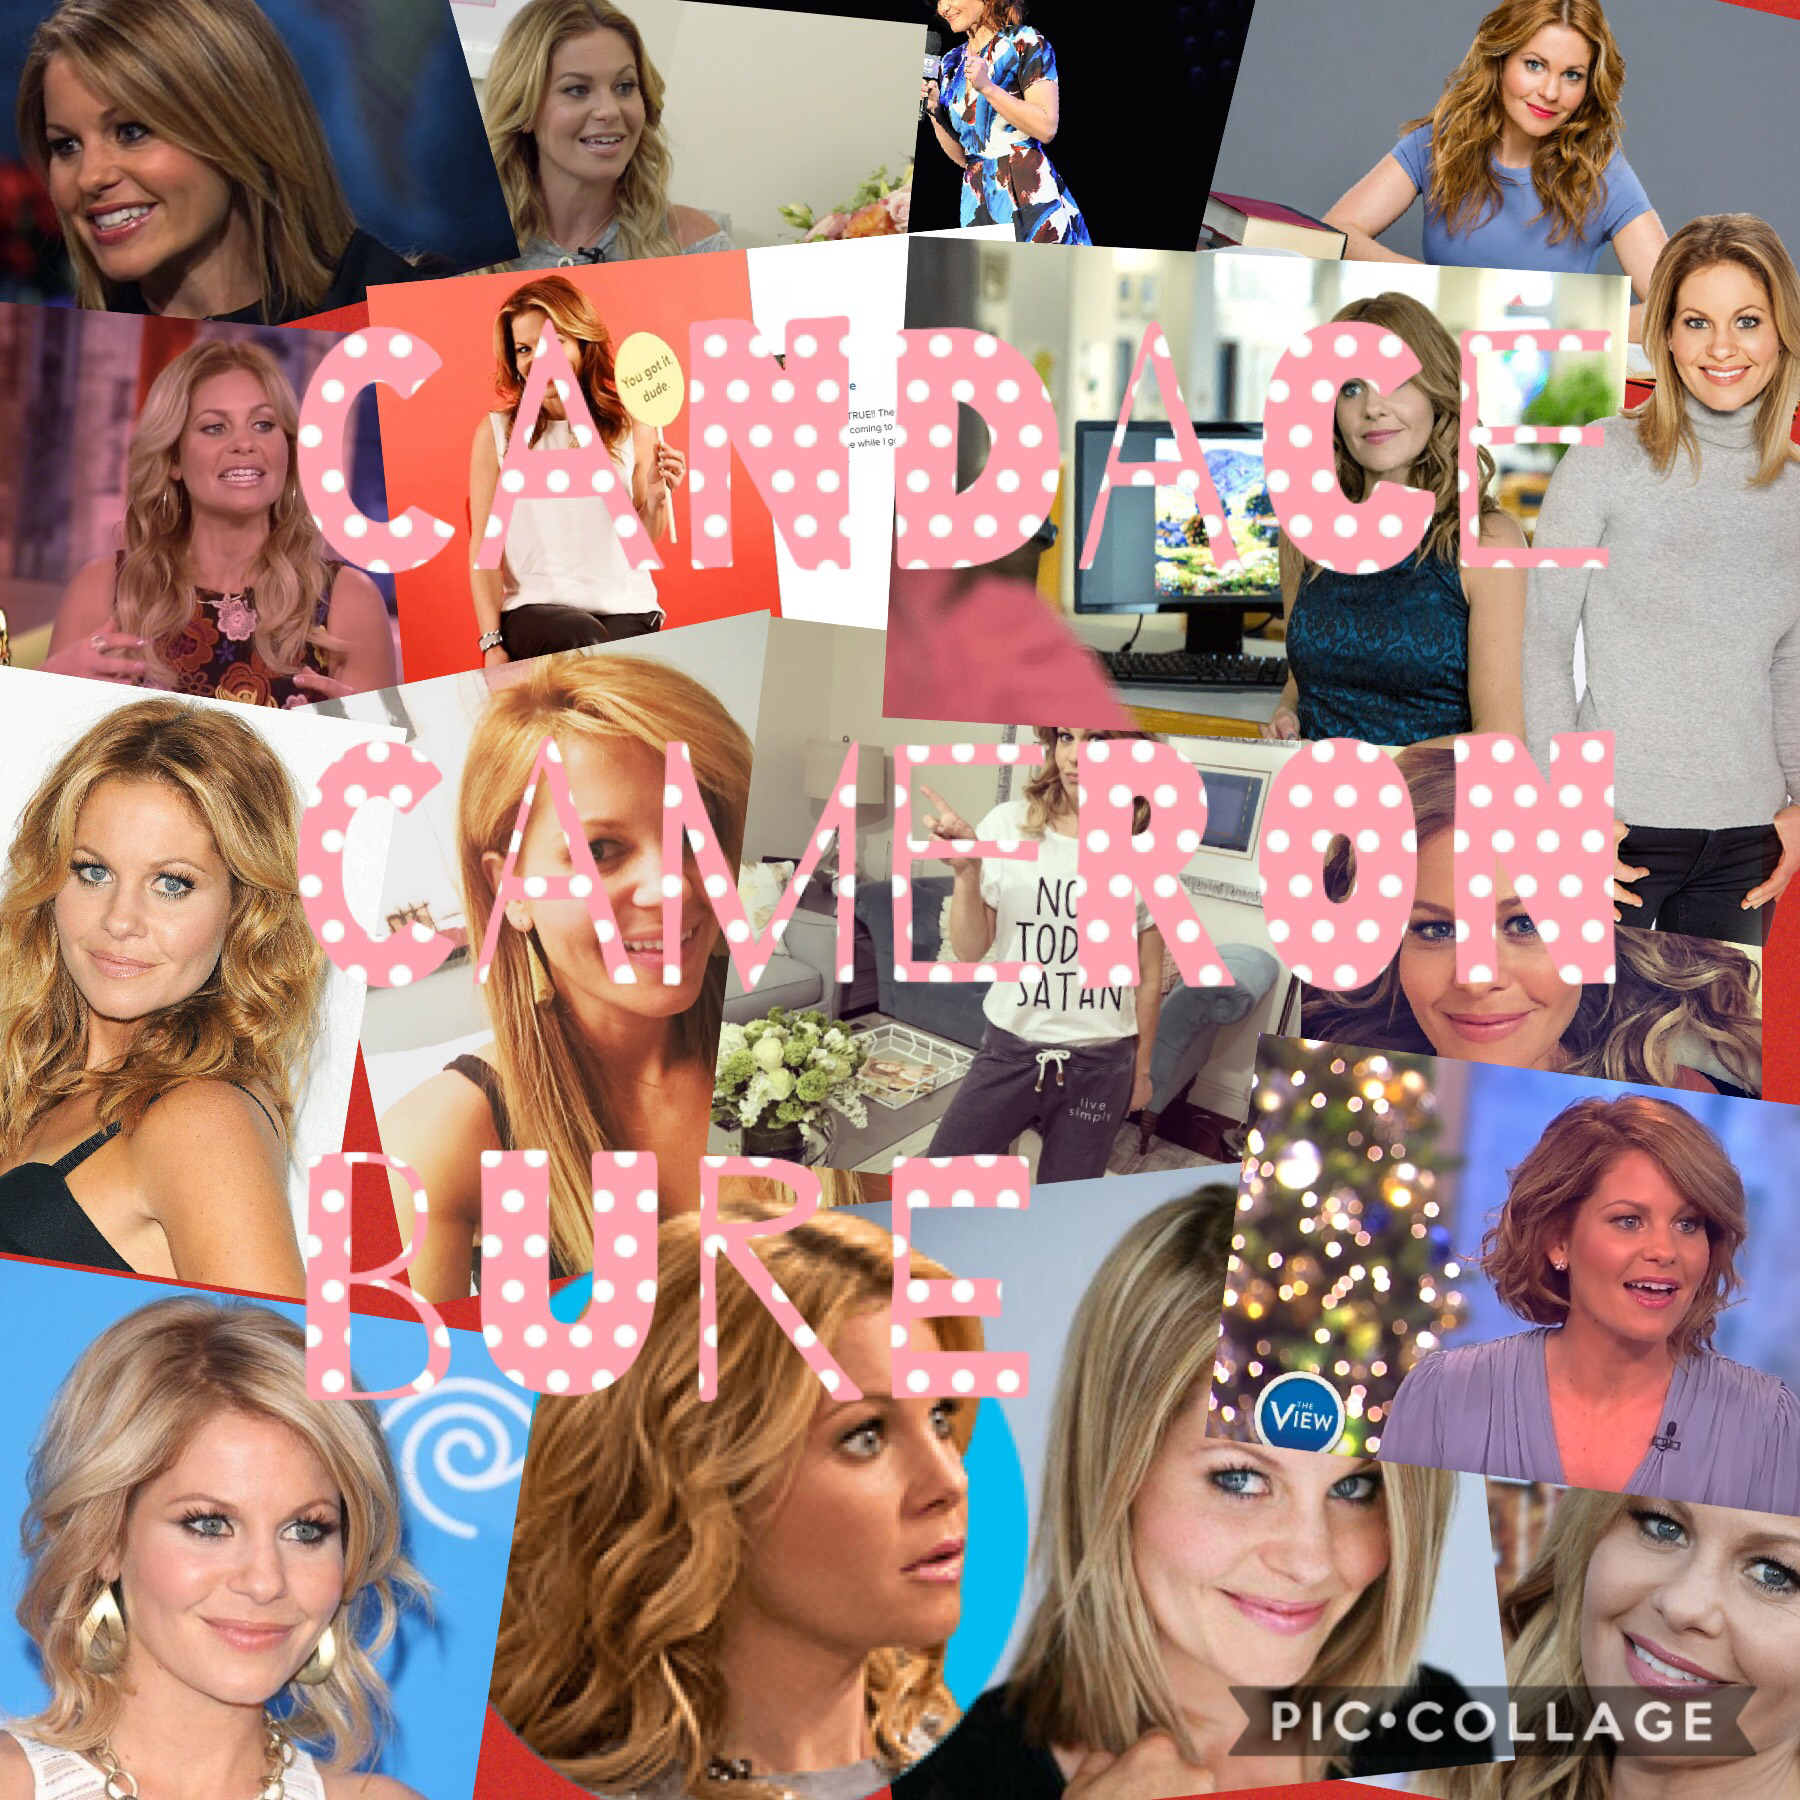 To the best actress: Candace Cameron Bure 